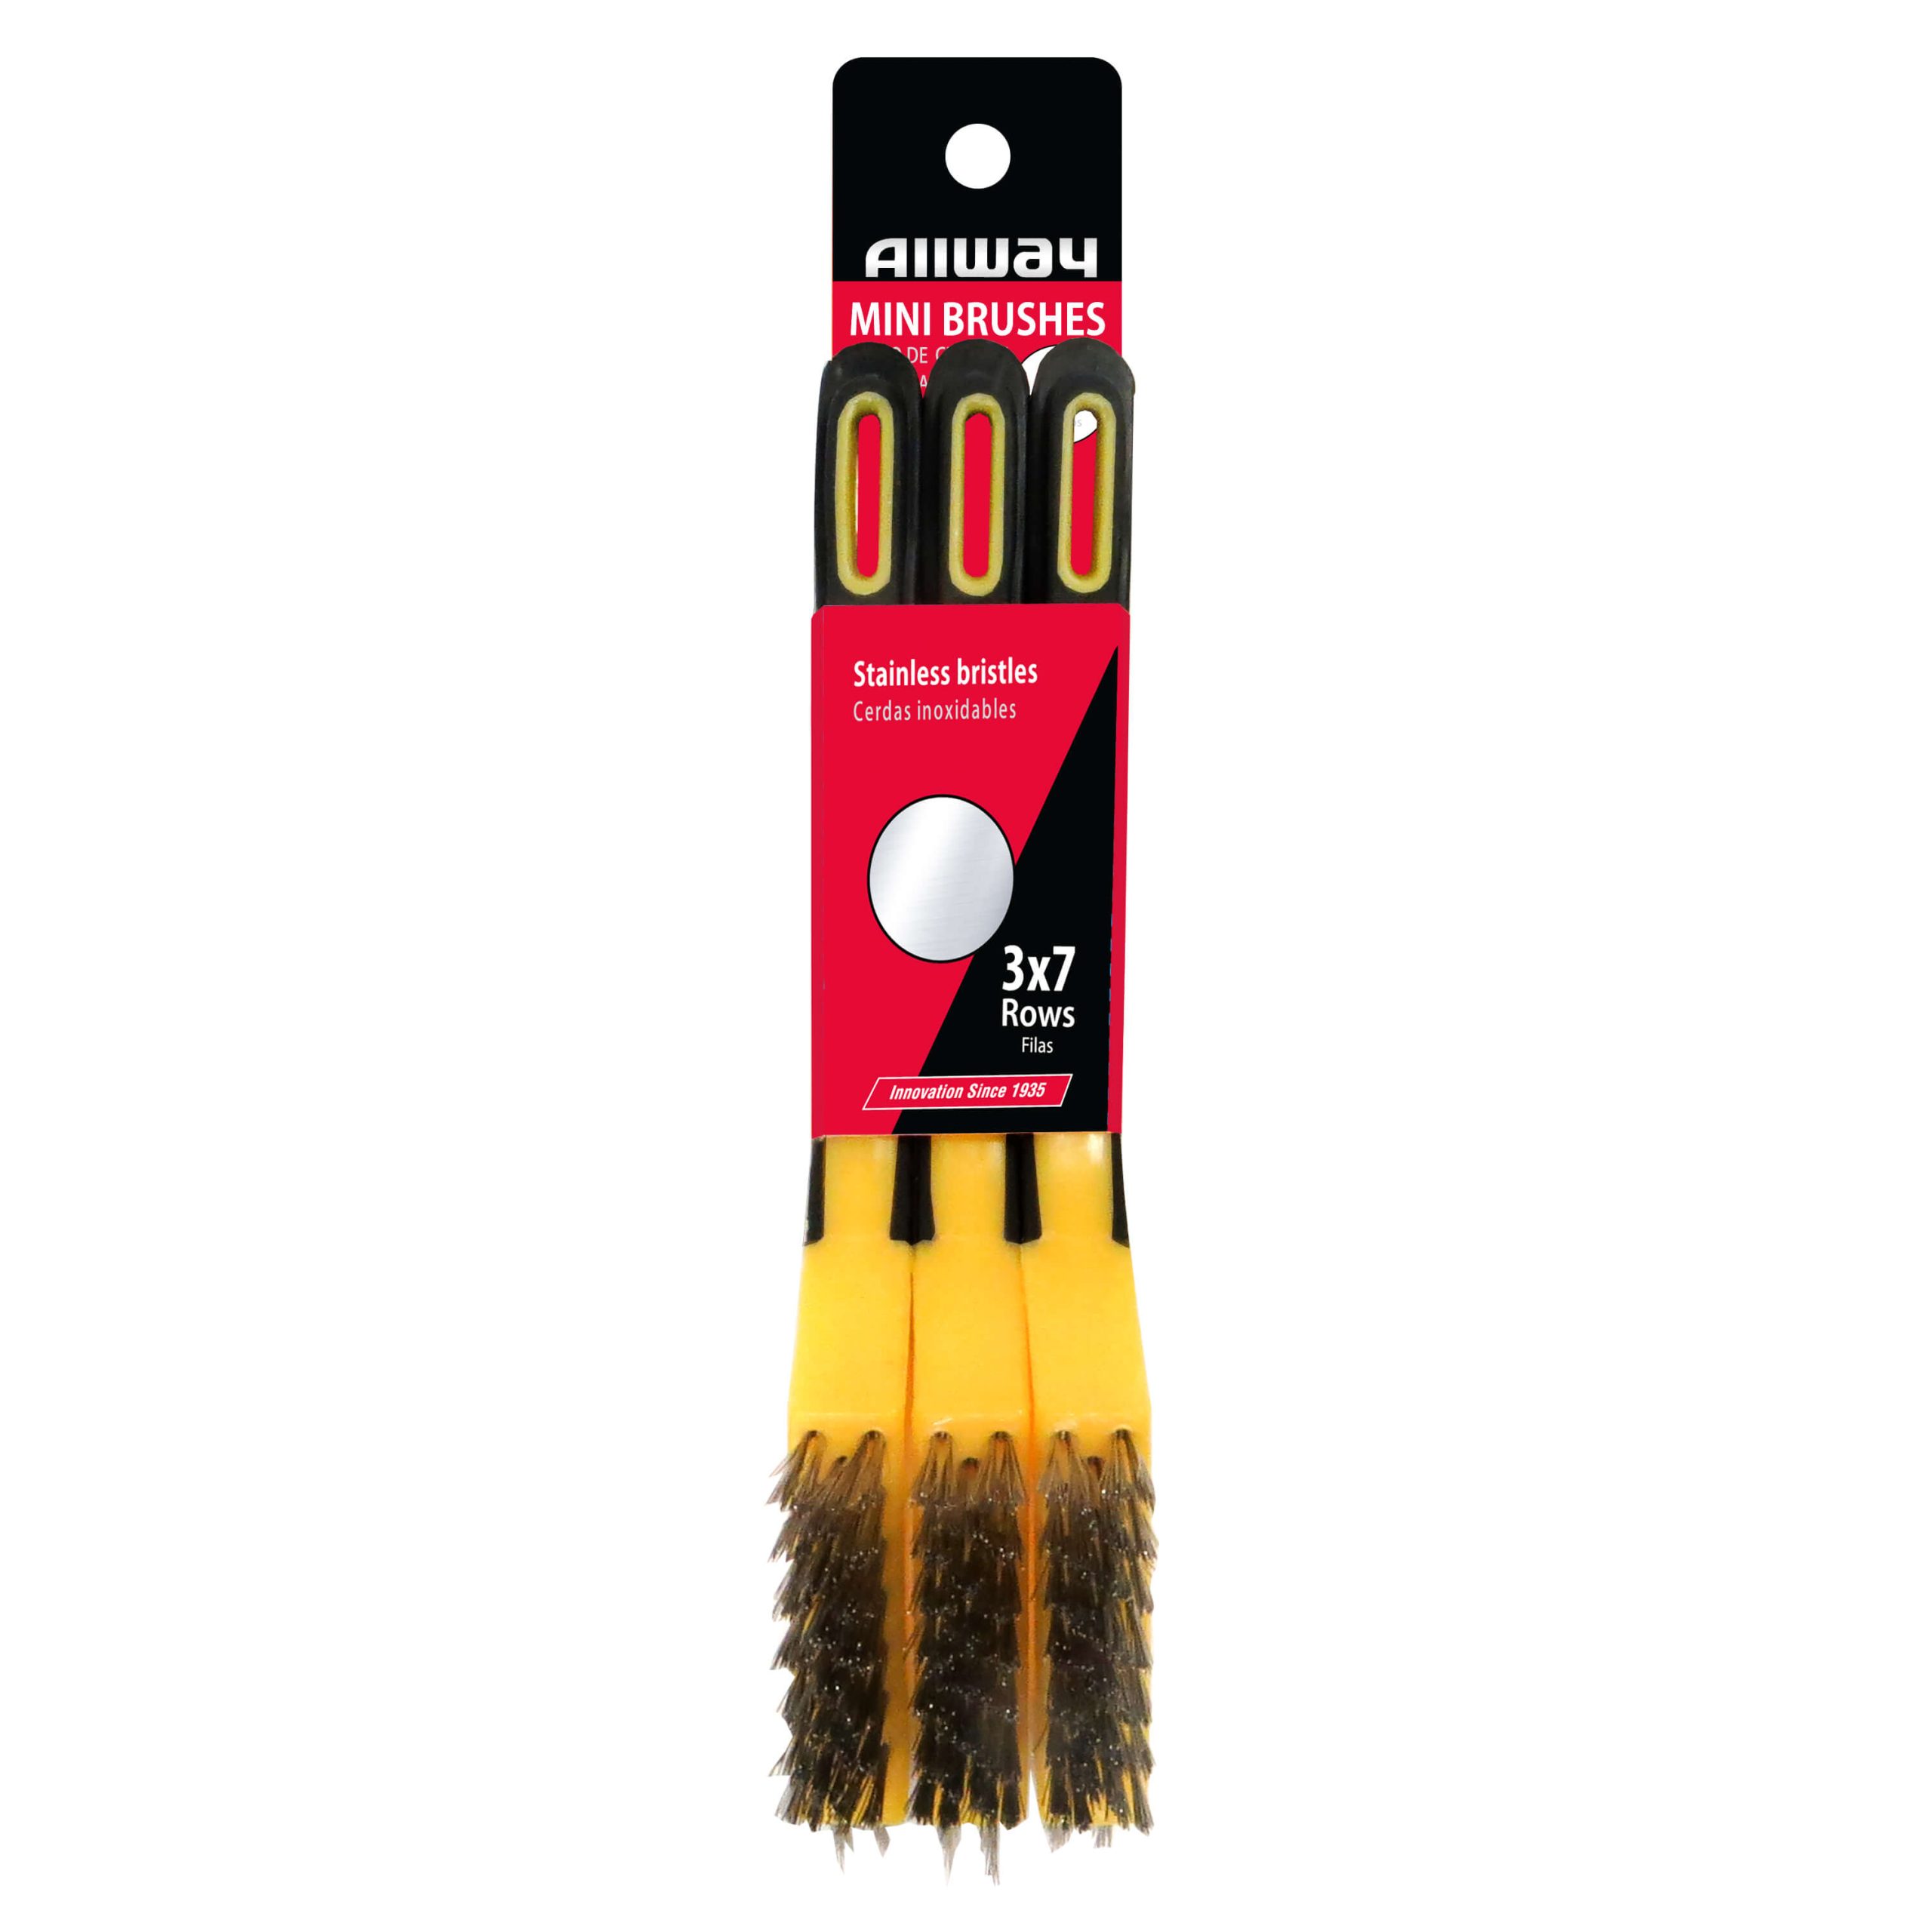 Micro Mini Brush Set of 12 - Great for Painting Small Details and Tight Spaces